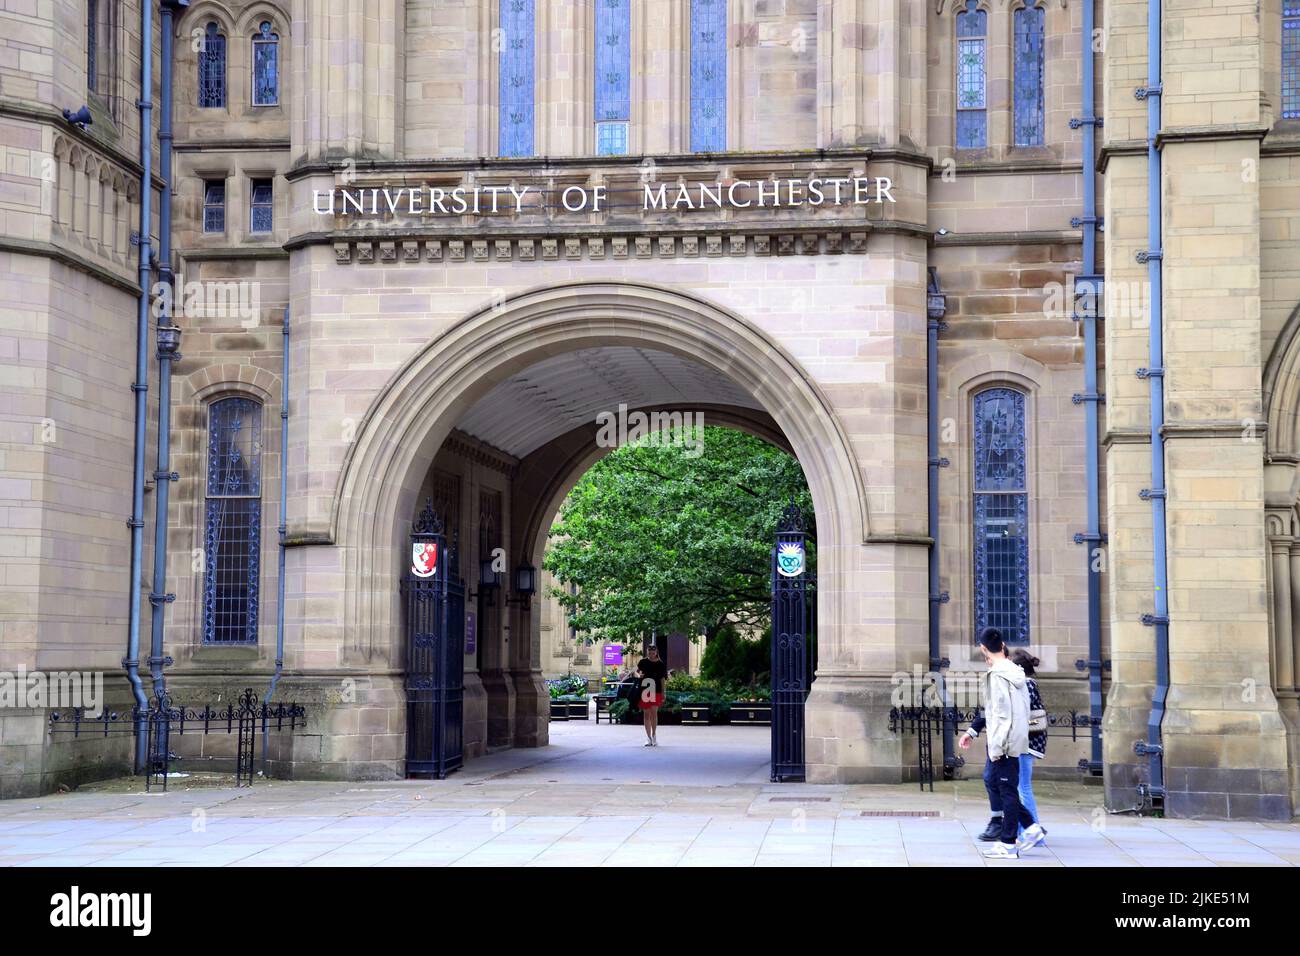 People walk in front of Whitworth Hall, University of Manchester, Oxford Road, Manchester, England, United Kingdom, British Isles. The UK Government has stopped the University of Manchester from licensing vision sensing technology to a Chinese company, citing national security grounds. The UK Government believes there is “potential” for this technology to be used for military purposes and can use the National Security and Investment Act 2021 to halt the agreement. The University of Manchester had made an agreement with Beijing Infinite Vision Technology Company Ltd. Stock Photo